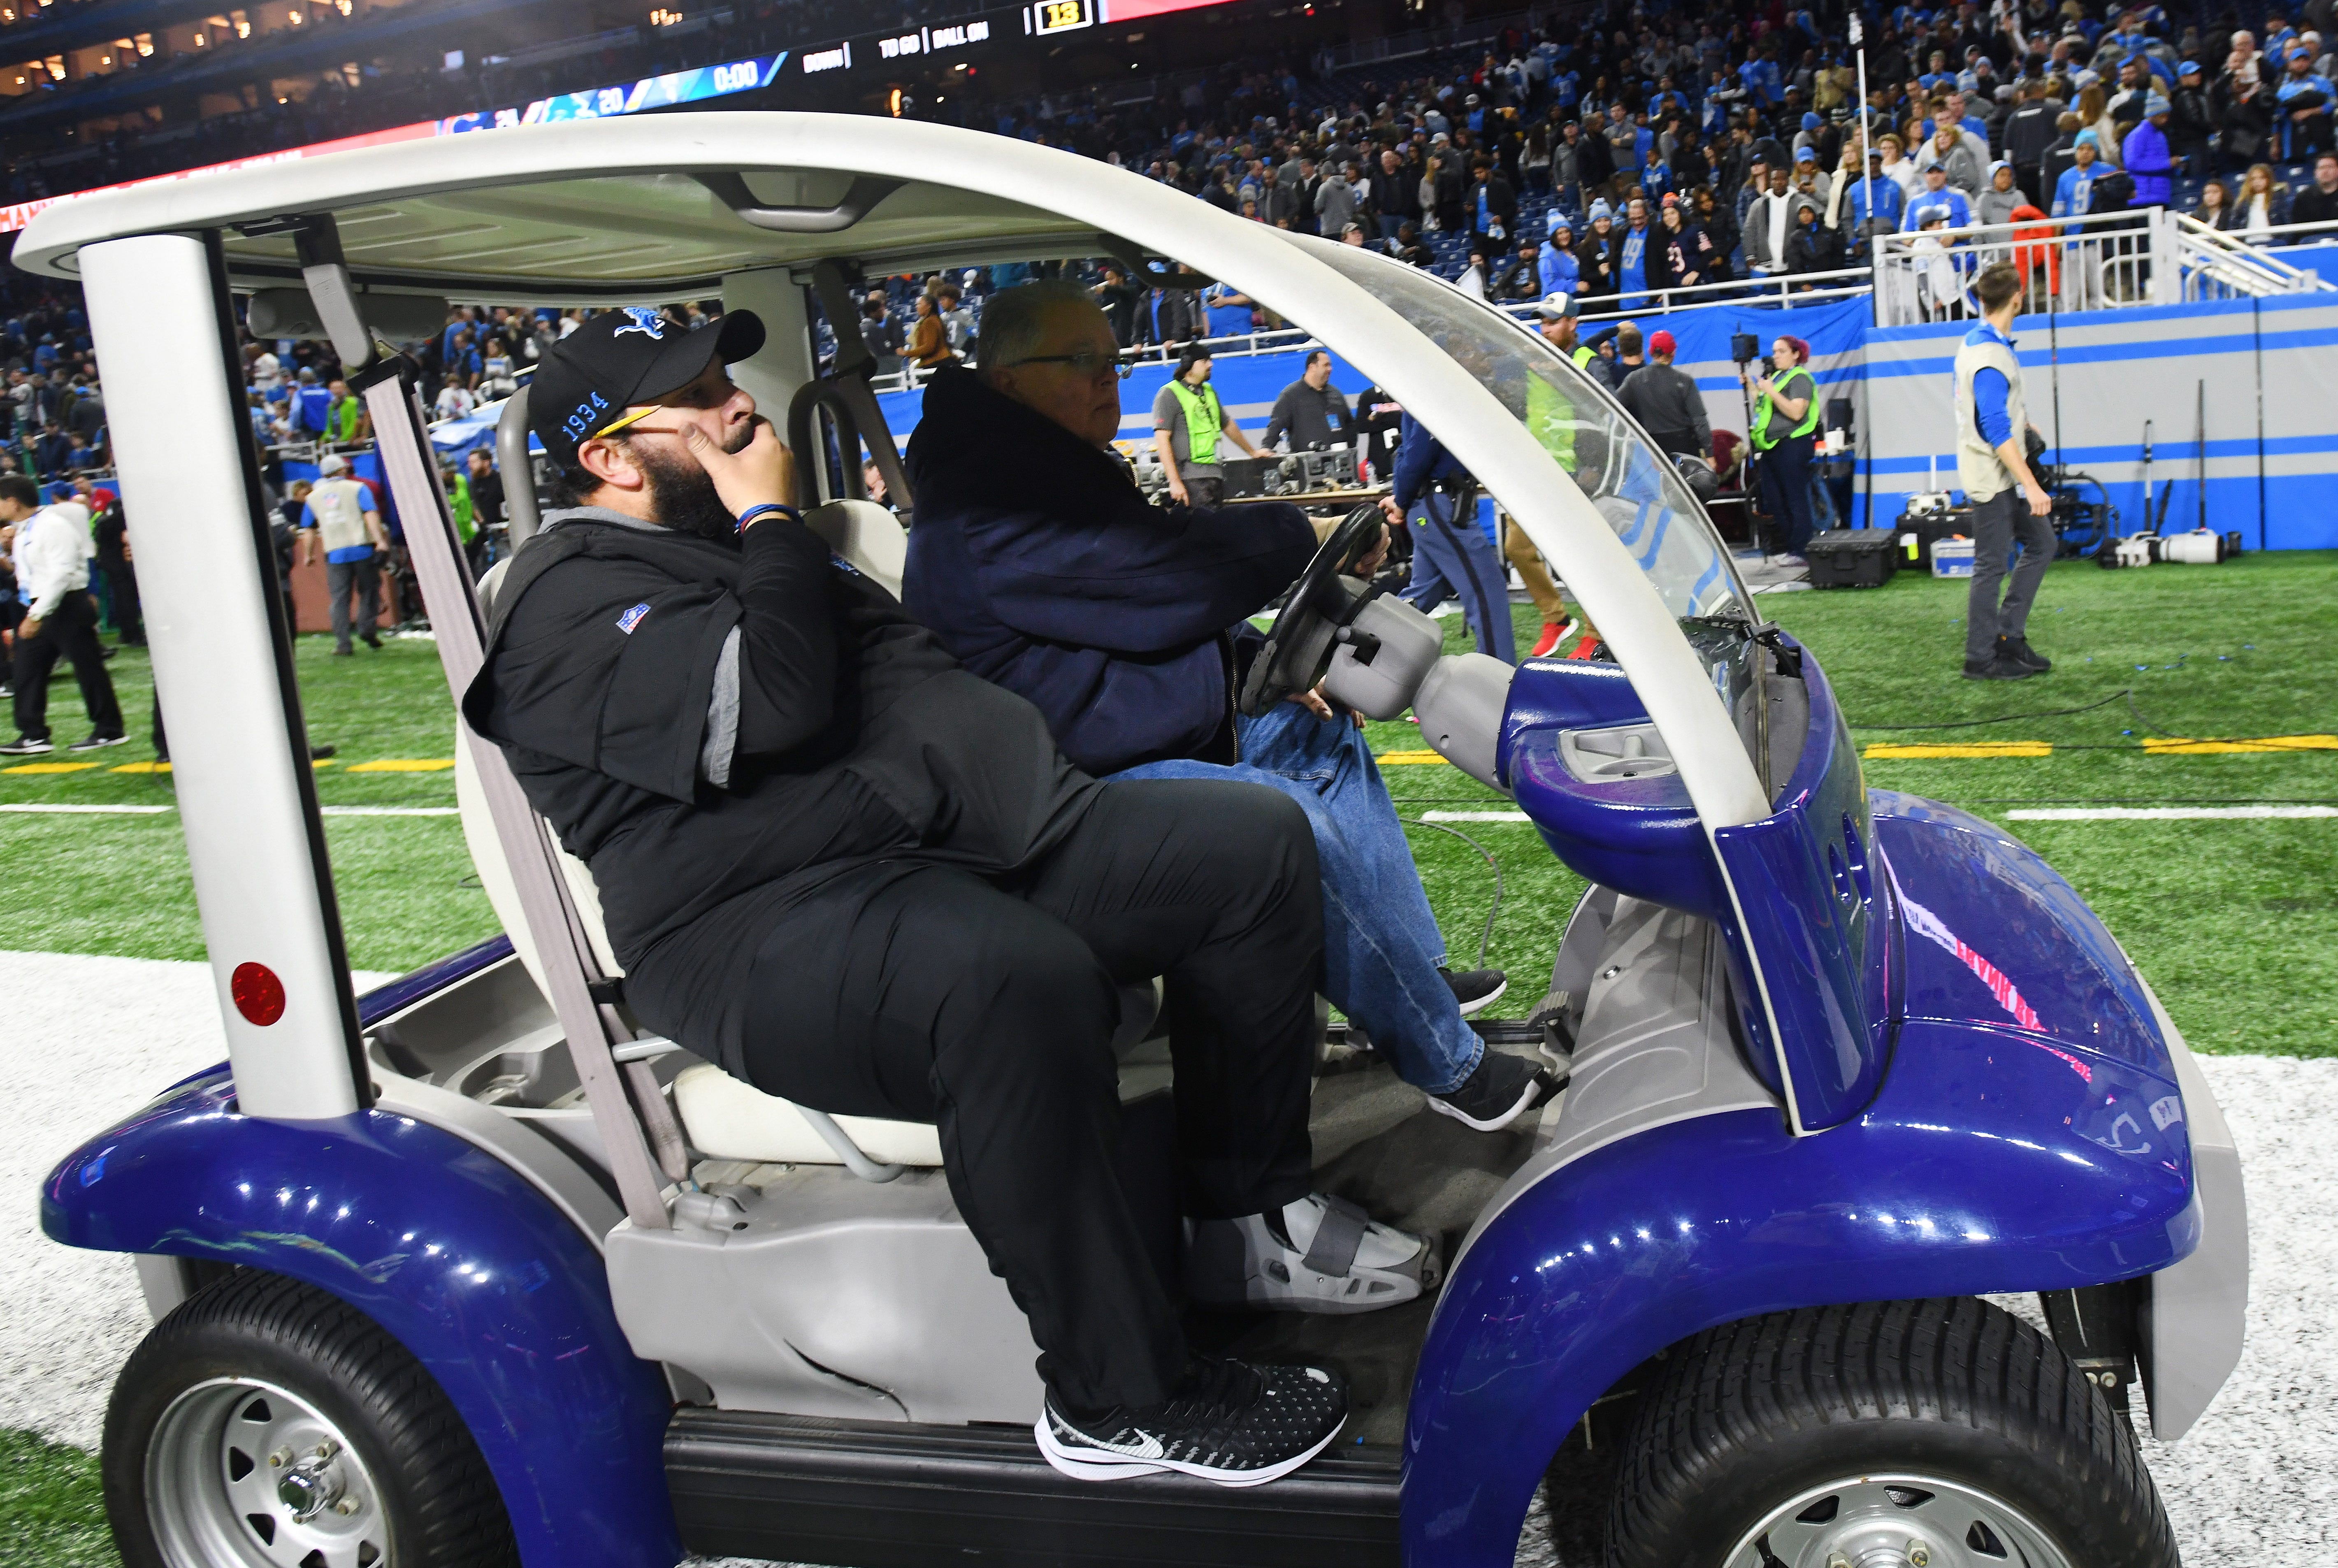 Lions head coach Matt Patricia leaves the field after a 24-20 loss to the 6-6 Chicago Bears, putting Detroit's record at 3-8-1. NFL Detroit Lions vs. Chicago Bears at Ford Field in Detroit, Michigan on November 28, 2019.